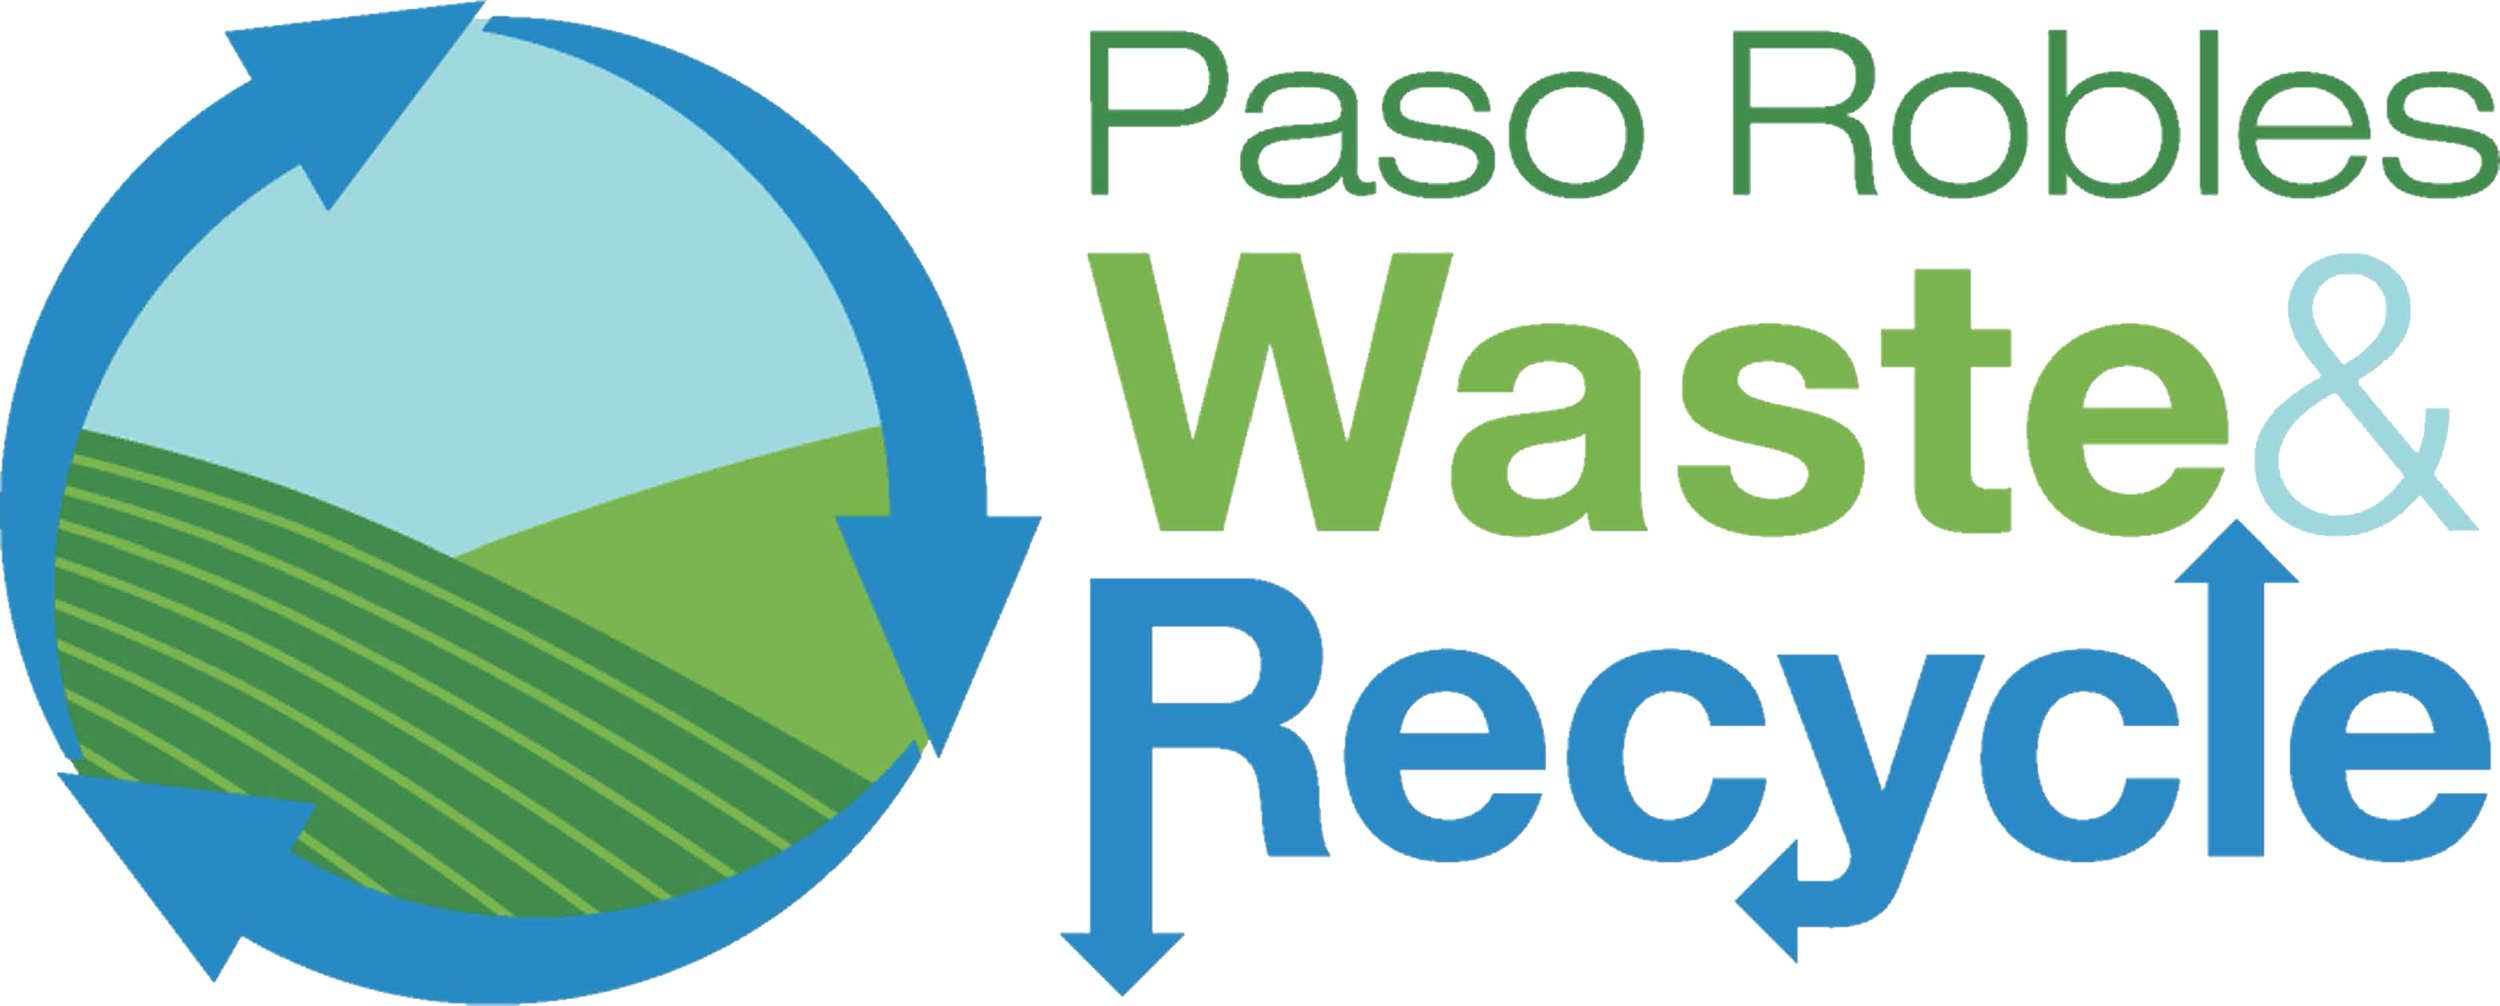 Paso Robles Waste & Recycle